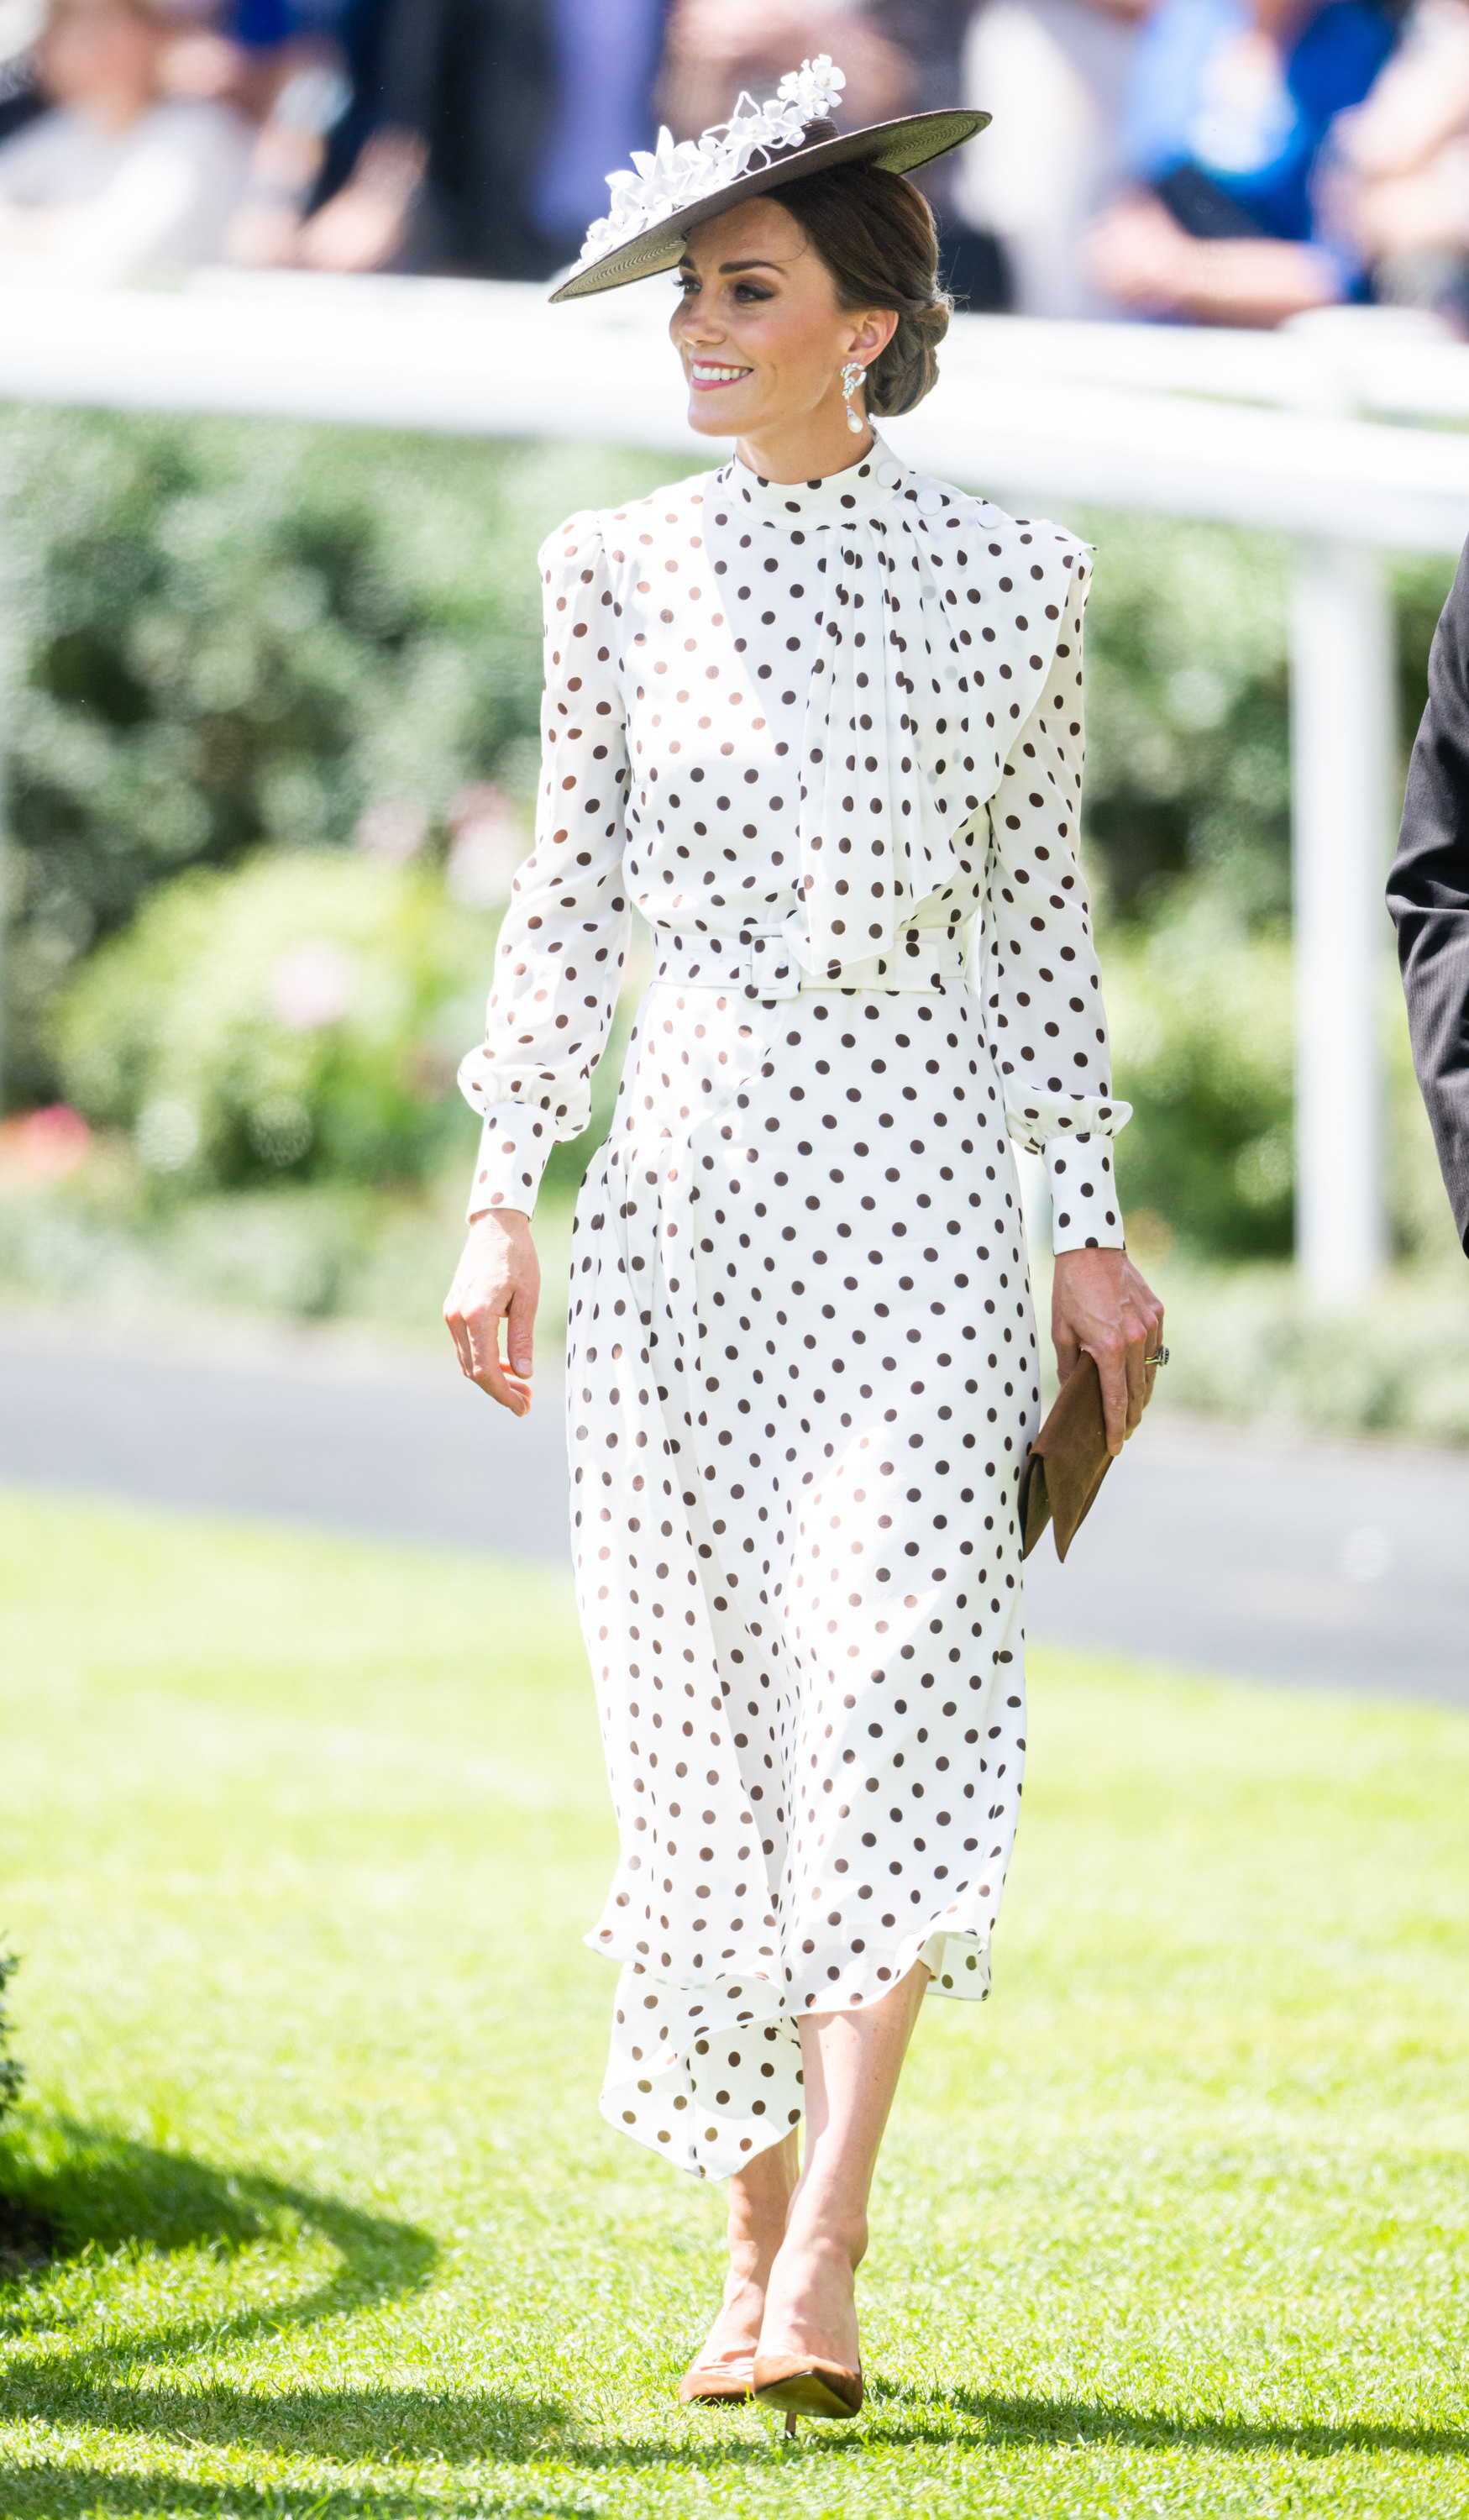 Kate Middleton Goes With a Navy and White Polka Dot For Appearance